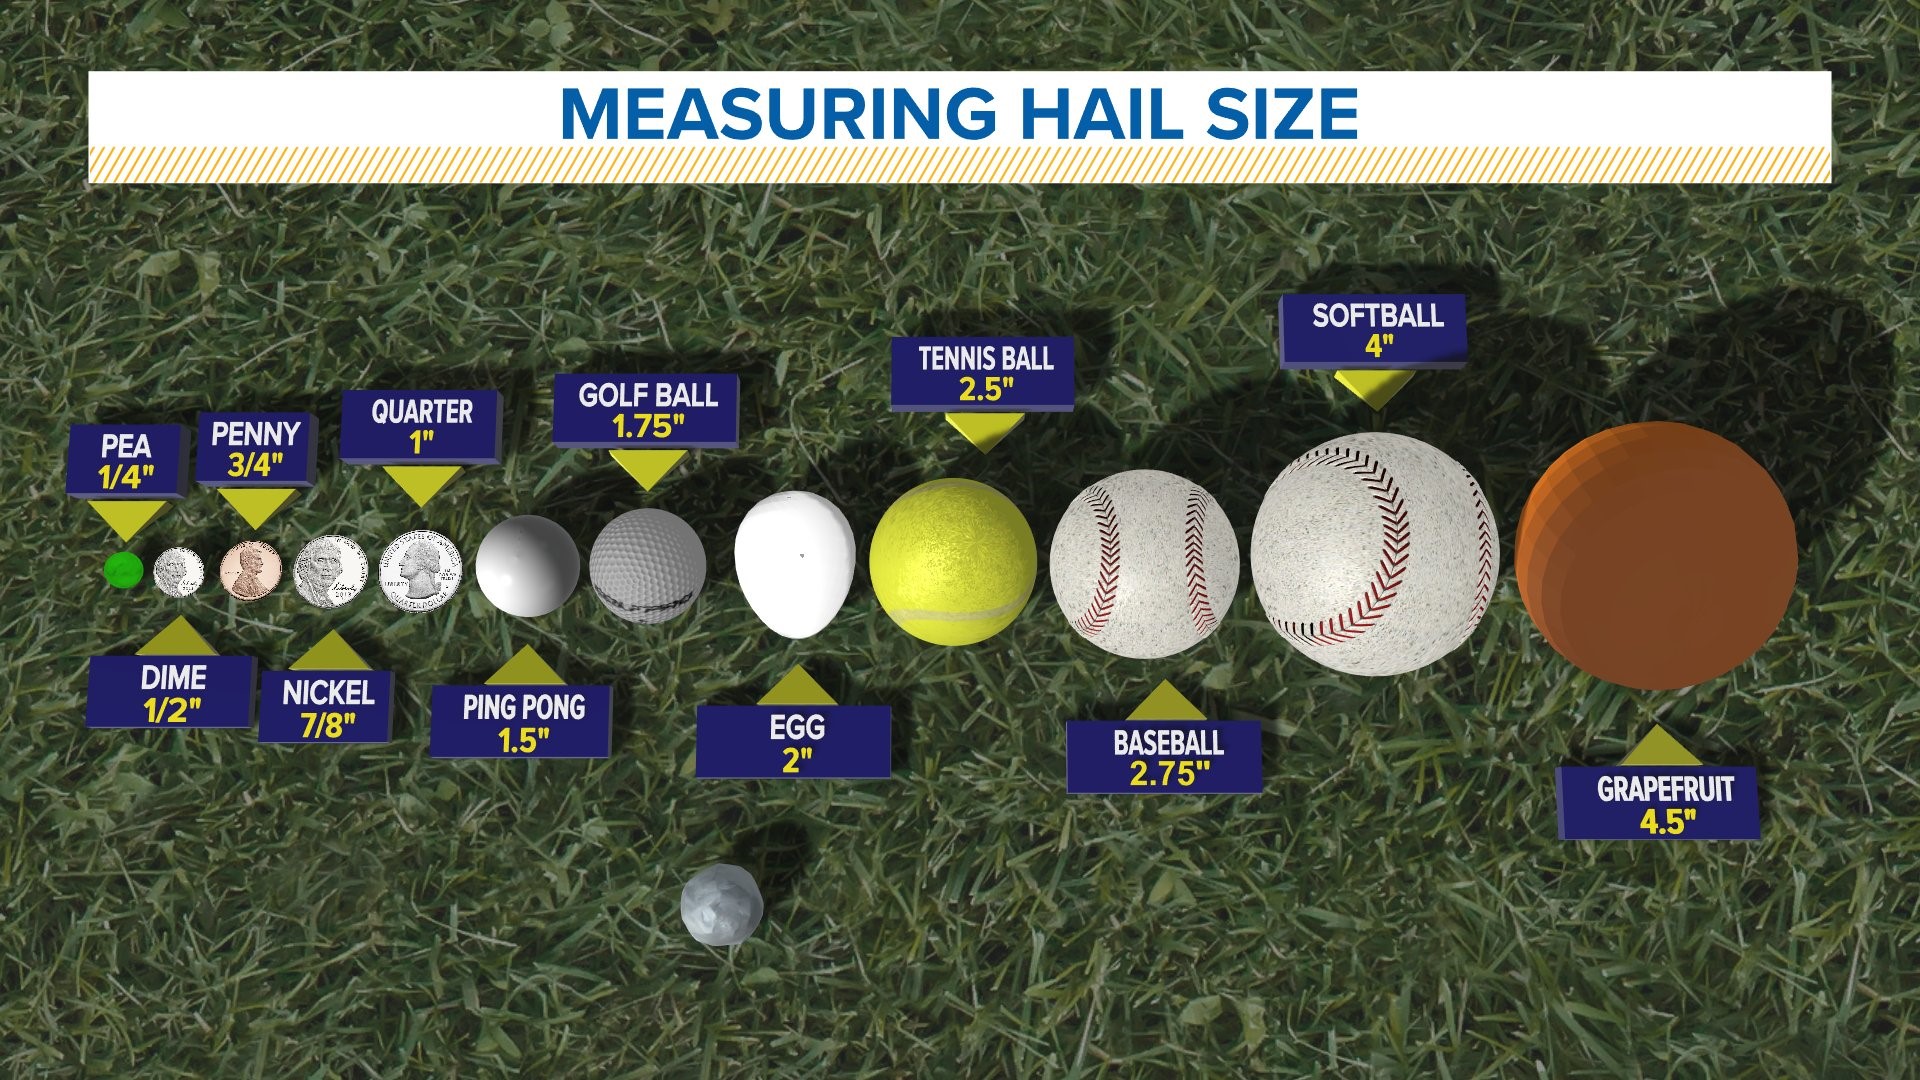 The hail formation process is complex, especially due to the atmosphere's unique vertical temperature profile.